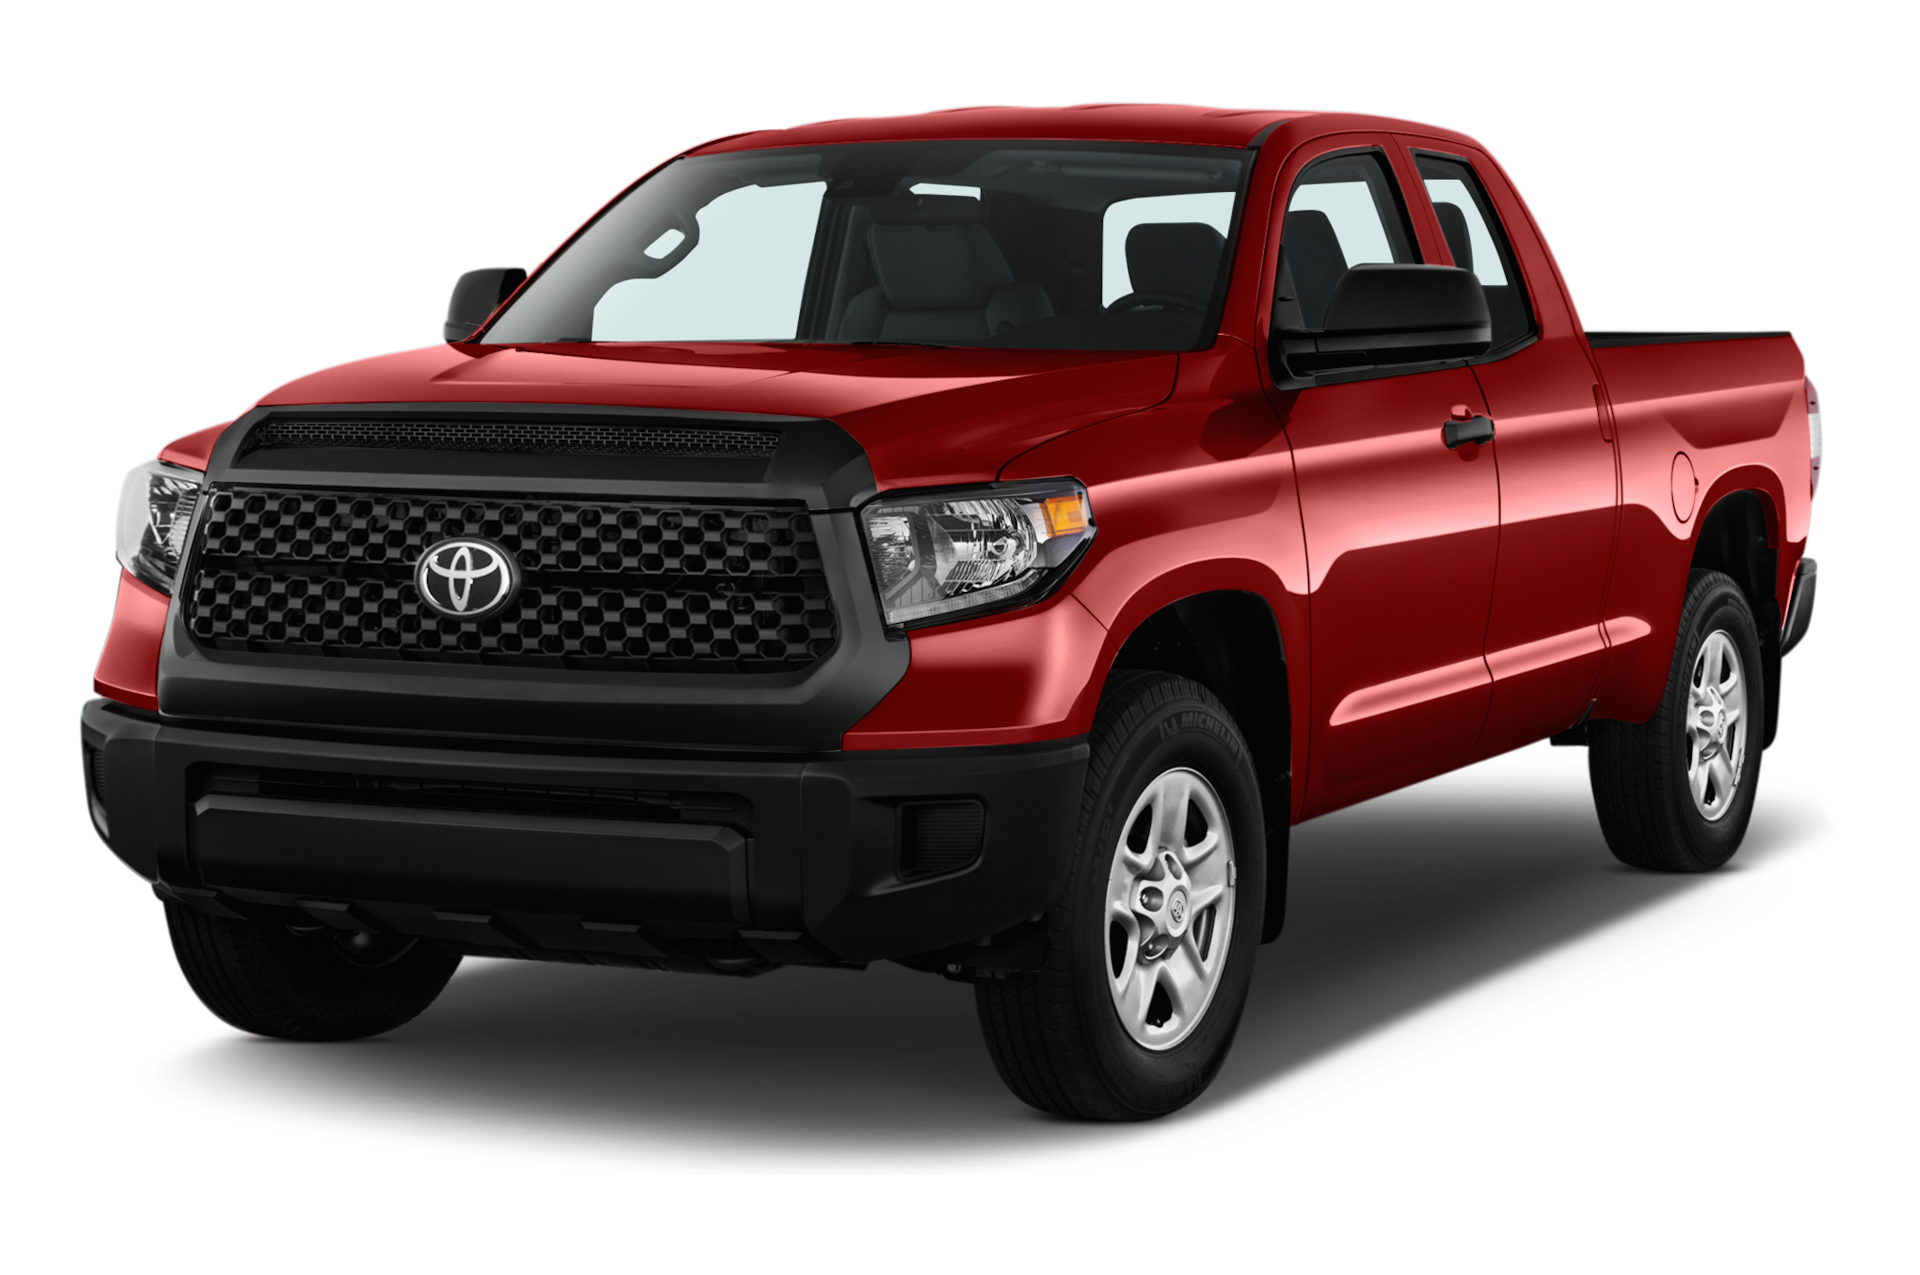 2018 Toyota Tundra Prices, Reviews, and Photos - MotorTrend